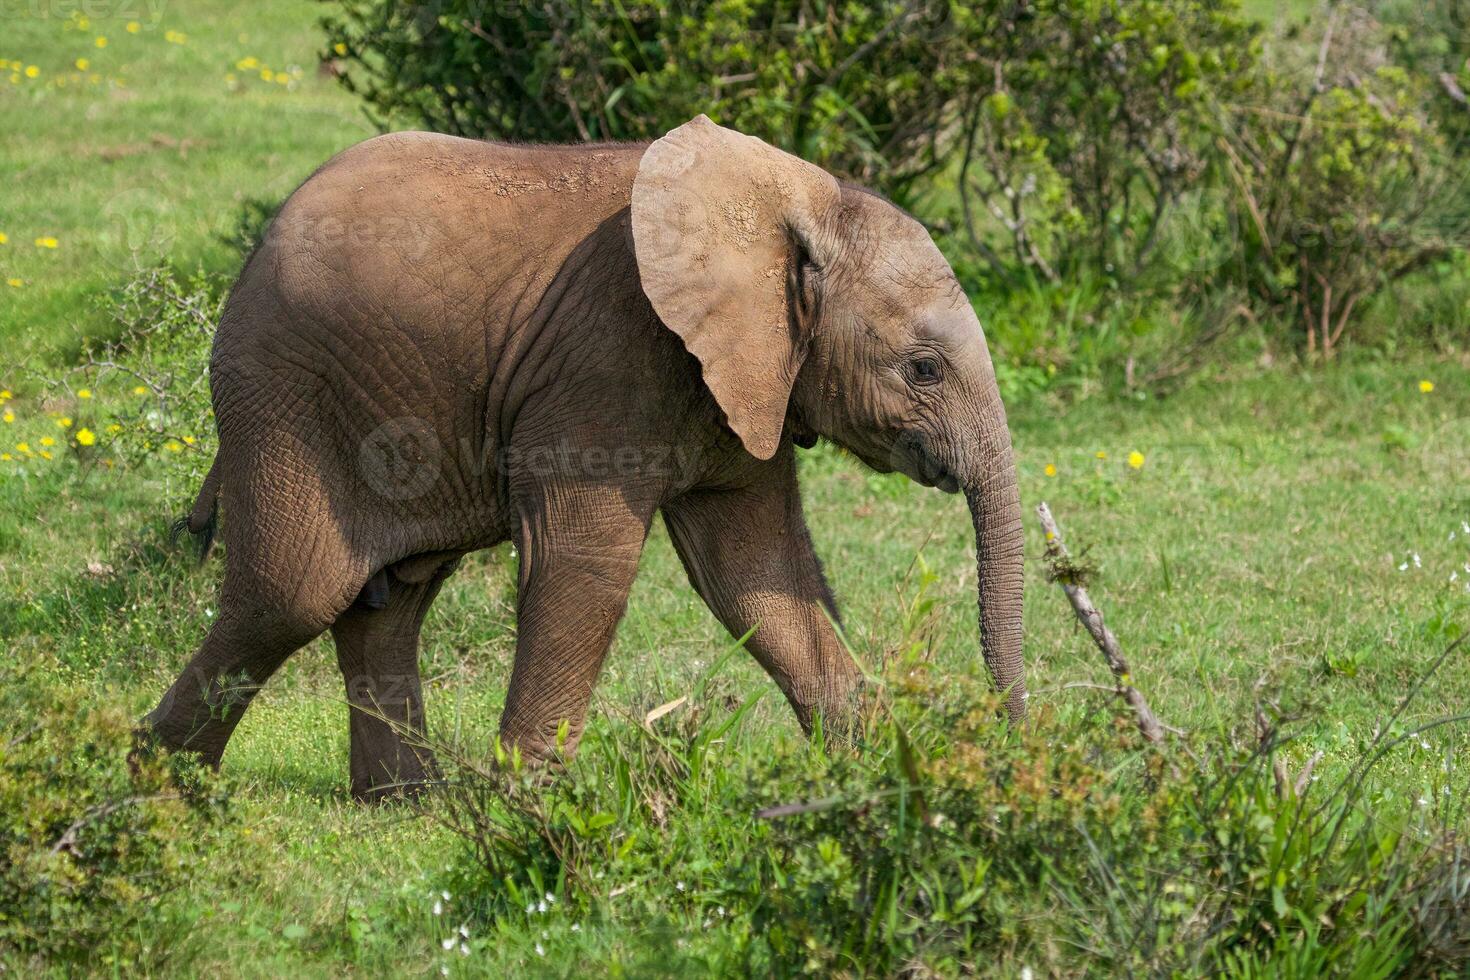 Elephants at Addo National Park, South Africa photo